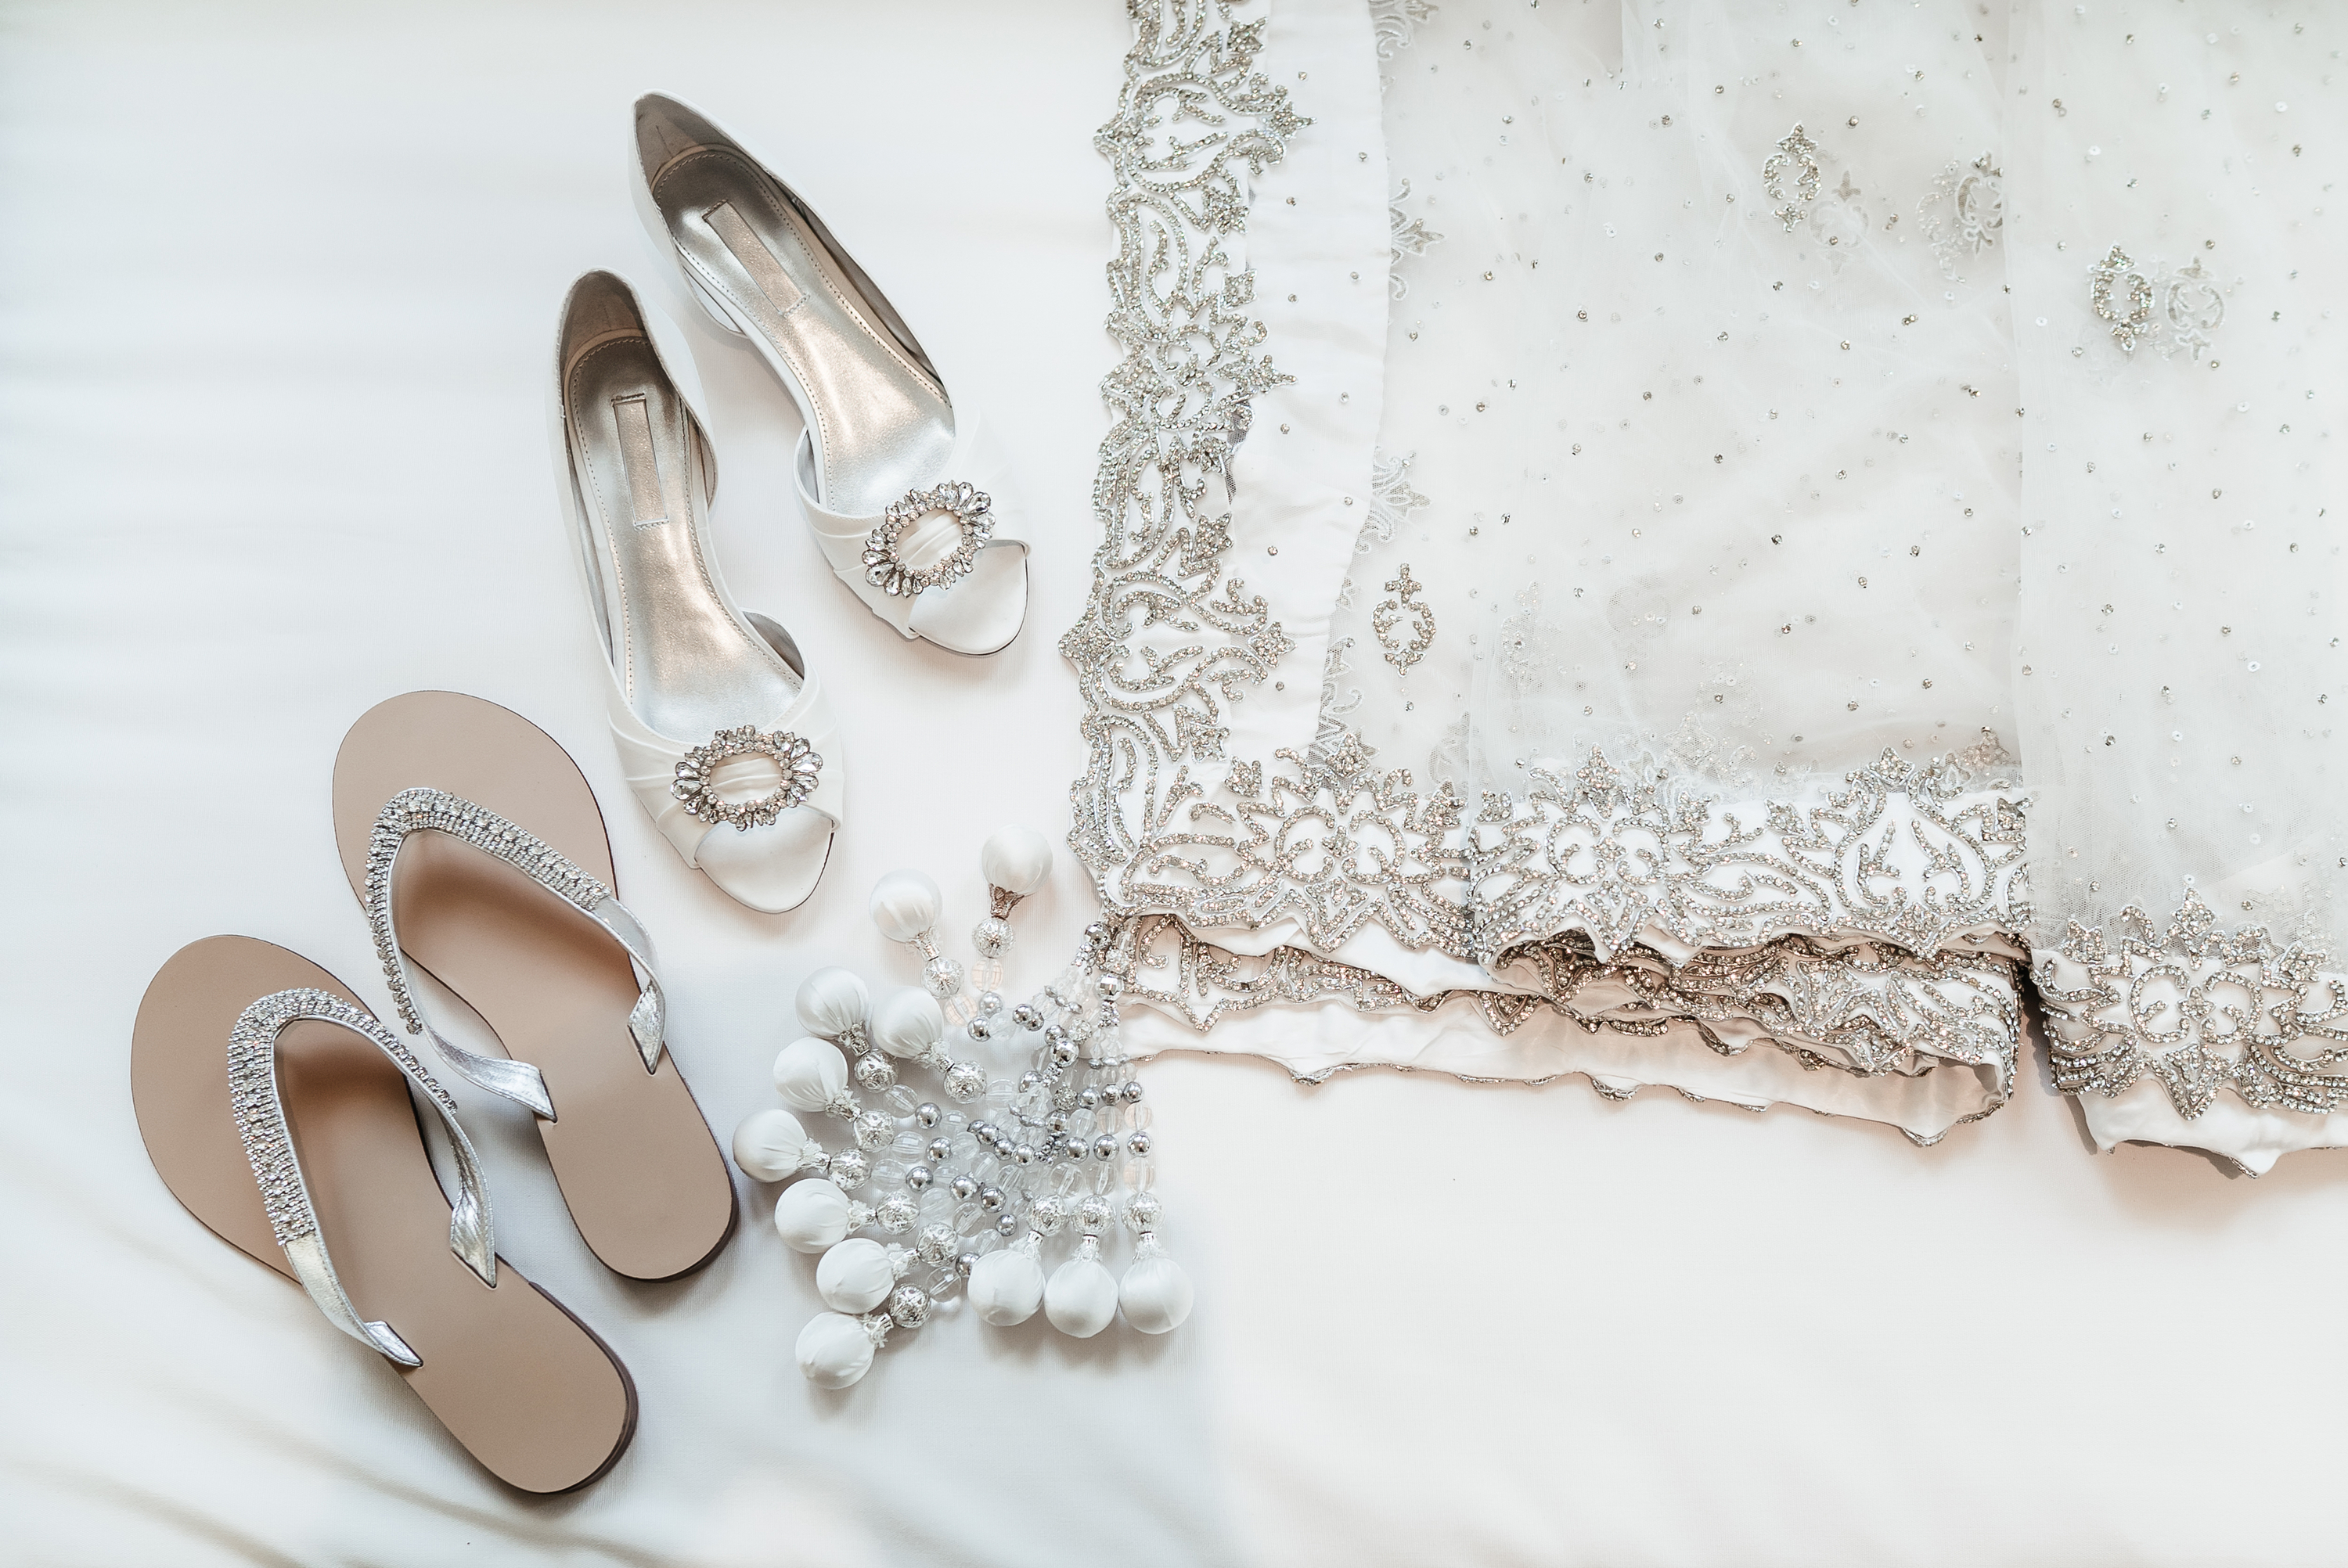 shoes | wedding shoes | high heels | sneakers | converse | sandals | flip flops | boots | wedding | bridal shoes | shoes for the bride | fashion 